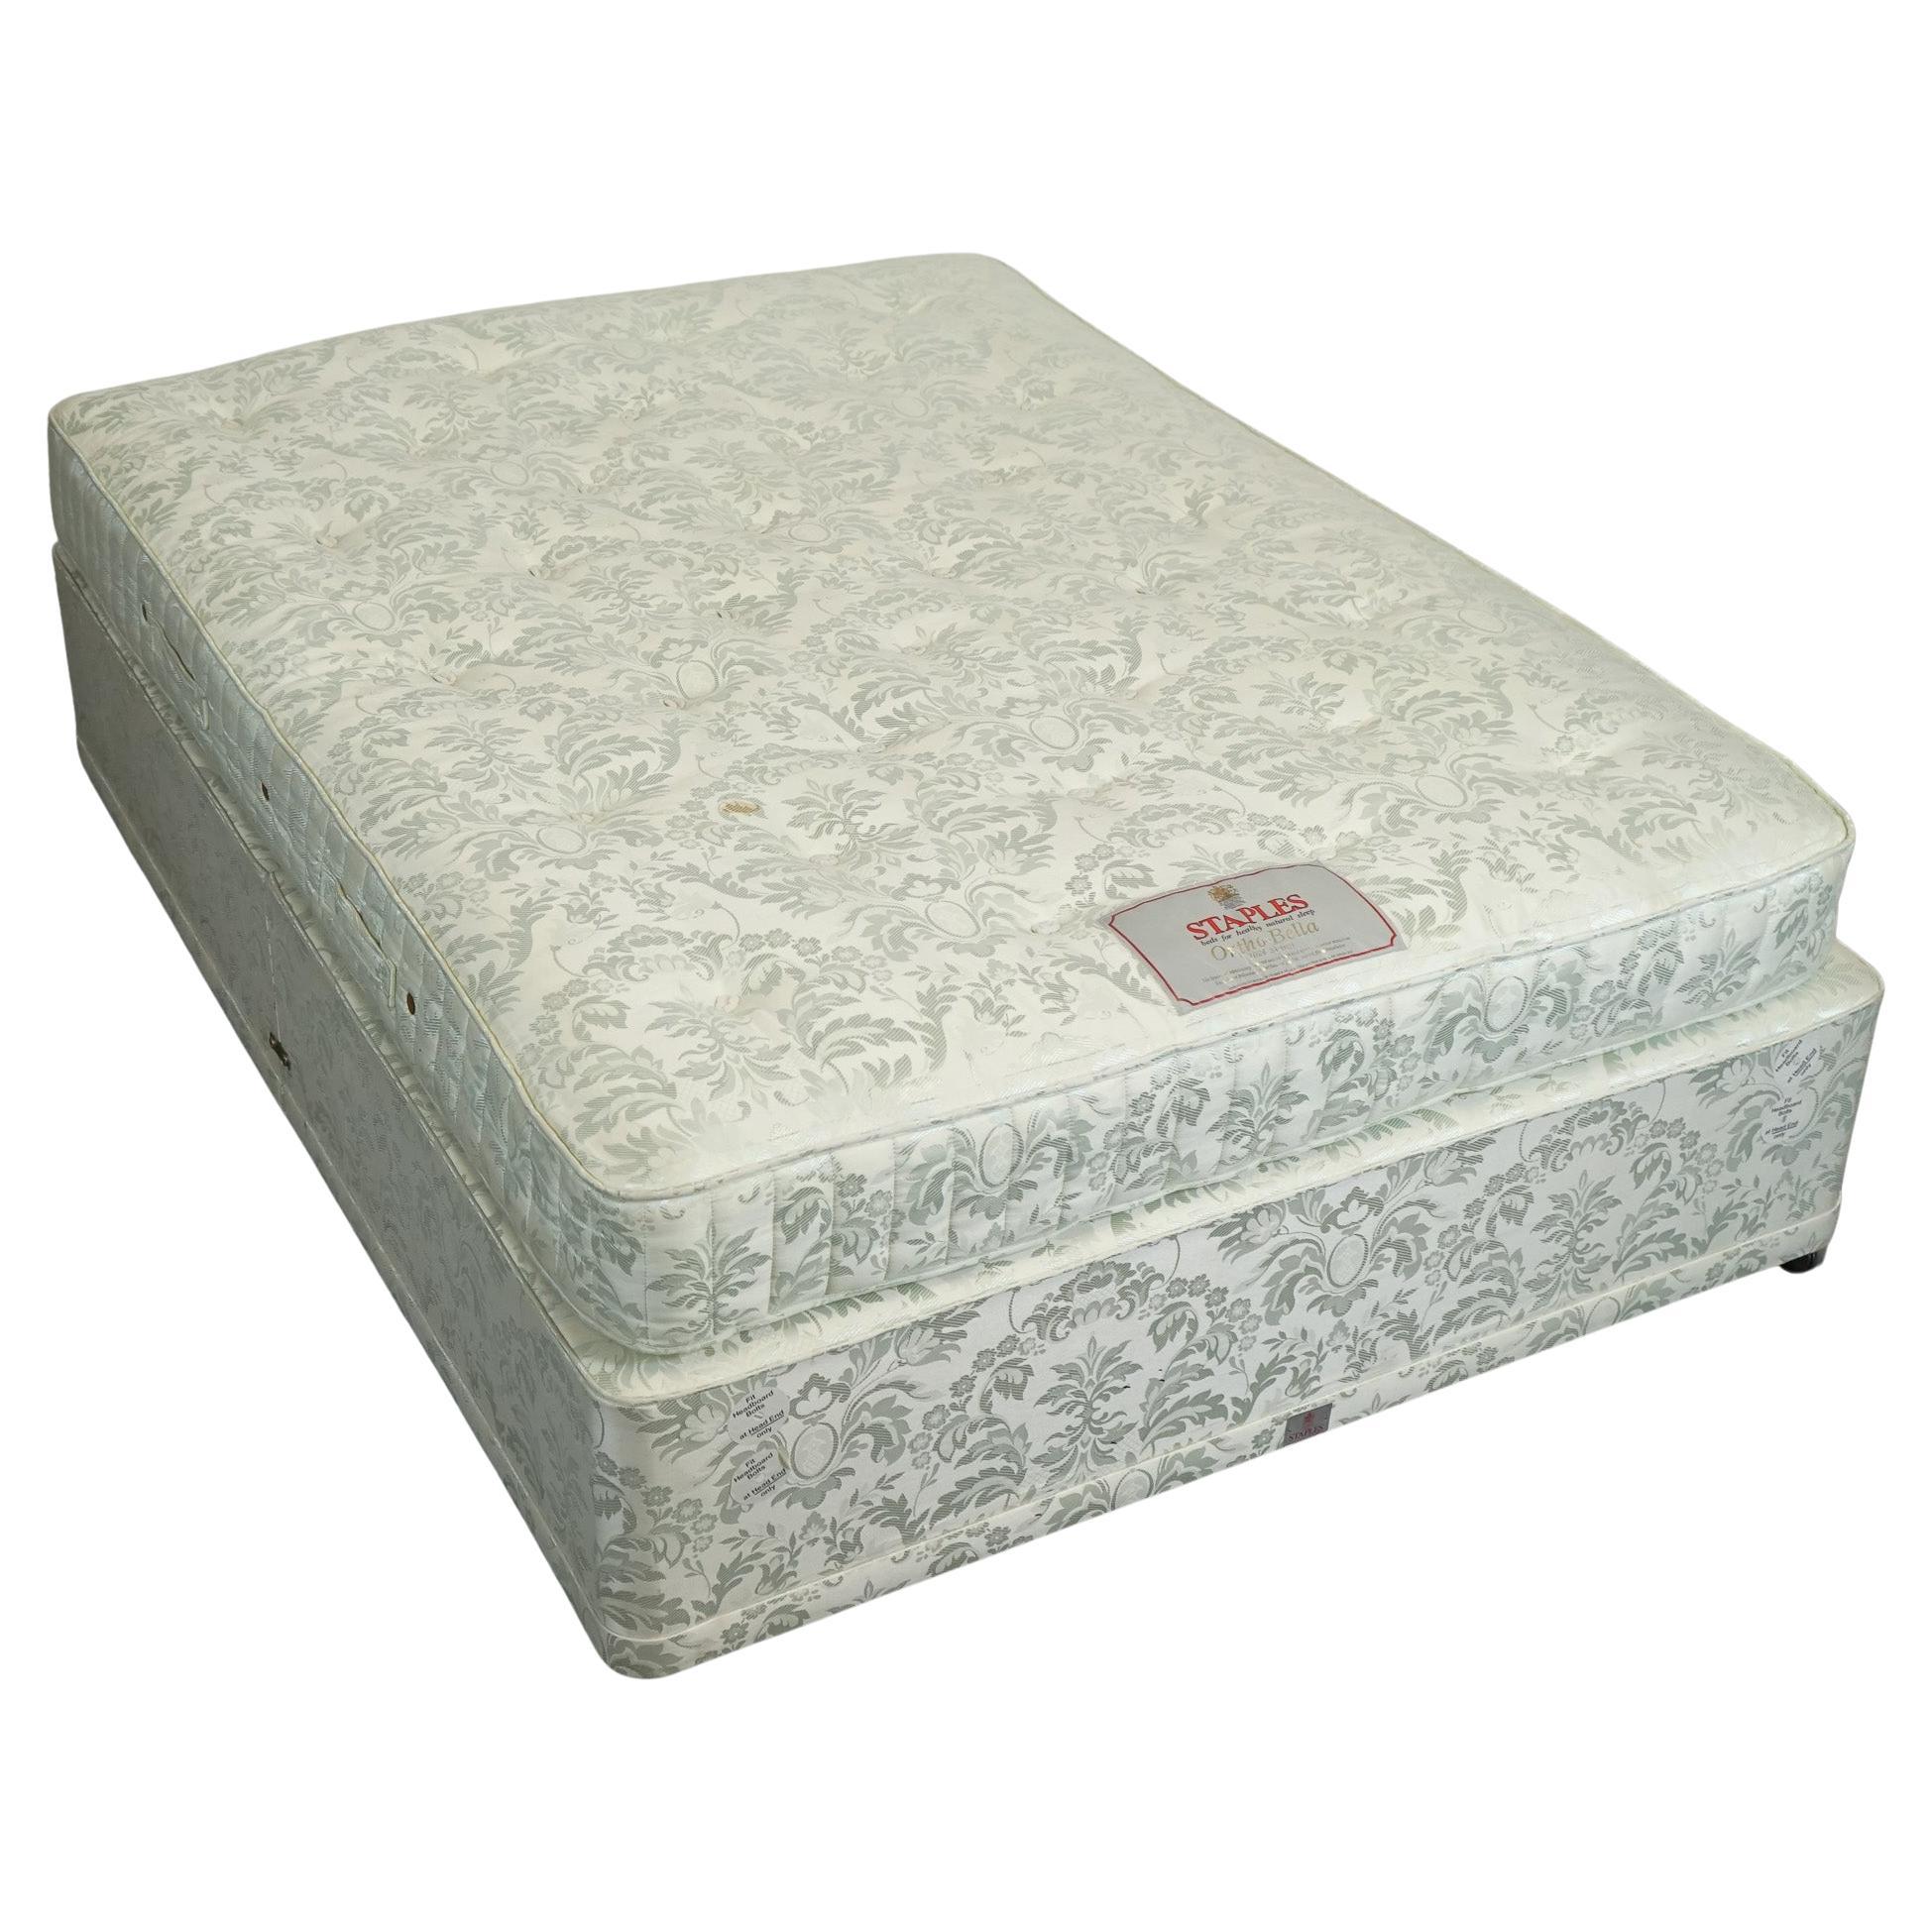 
We are delighted to offer for sale this Lovely Comfortable Double Divan Bed by Staples & Co.

A lovely comfortable bed from a very good quality company.

The mattress has some marks here and there.

Please carefully examine the pictures to see the